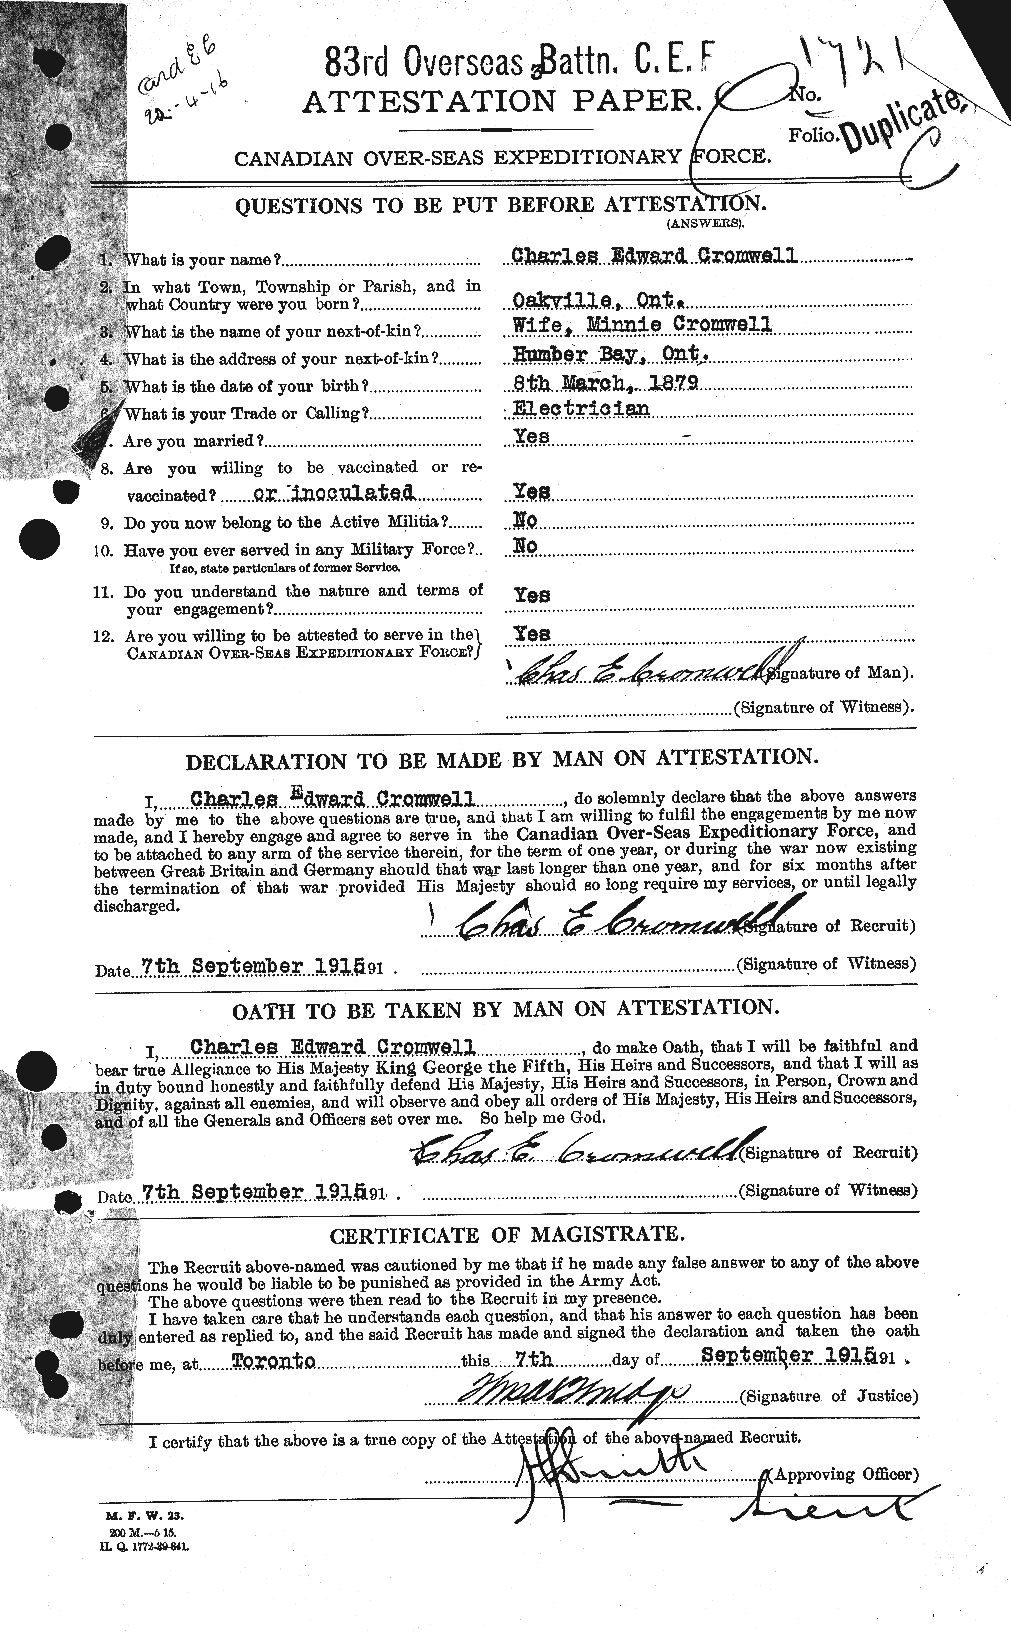 Personnel Records of the First World War - CEF 064935a